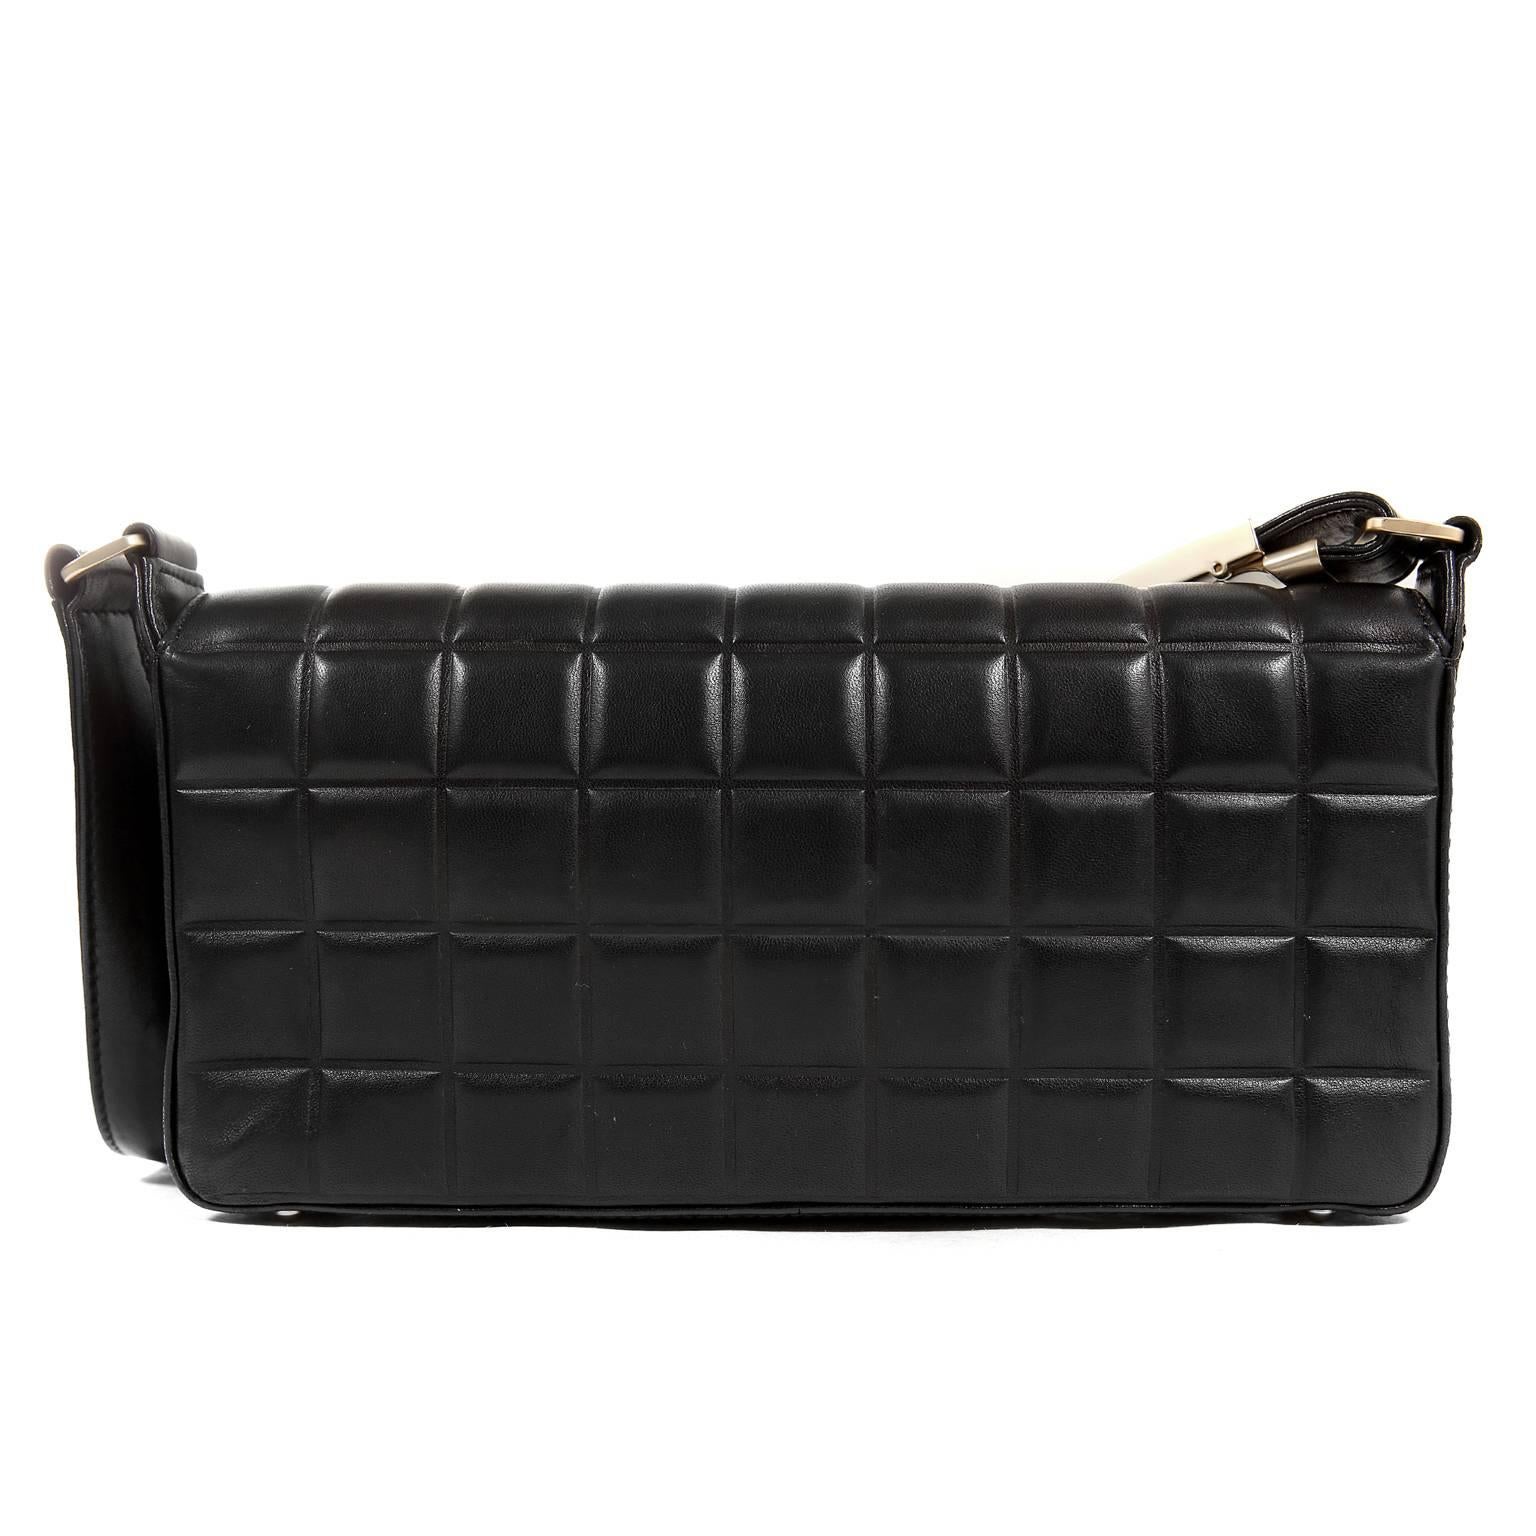 Chanel Black Leather Square Quilted Day Bag- MINT conditio
The medium silhouette is perfectly sized for day or evening and easily carries all the essentials.
Black leather is quilted in square pattern with matte gold hardware accents.  A concealed